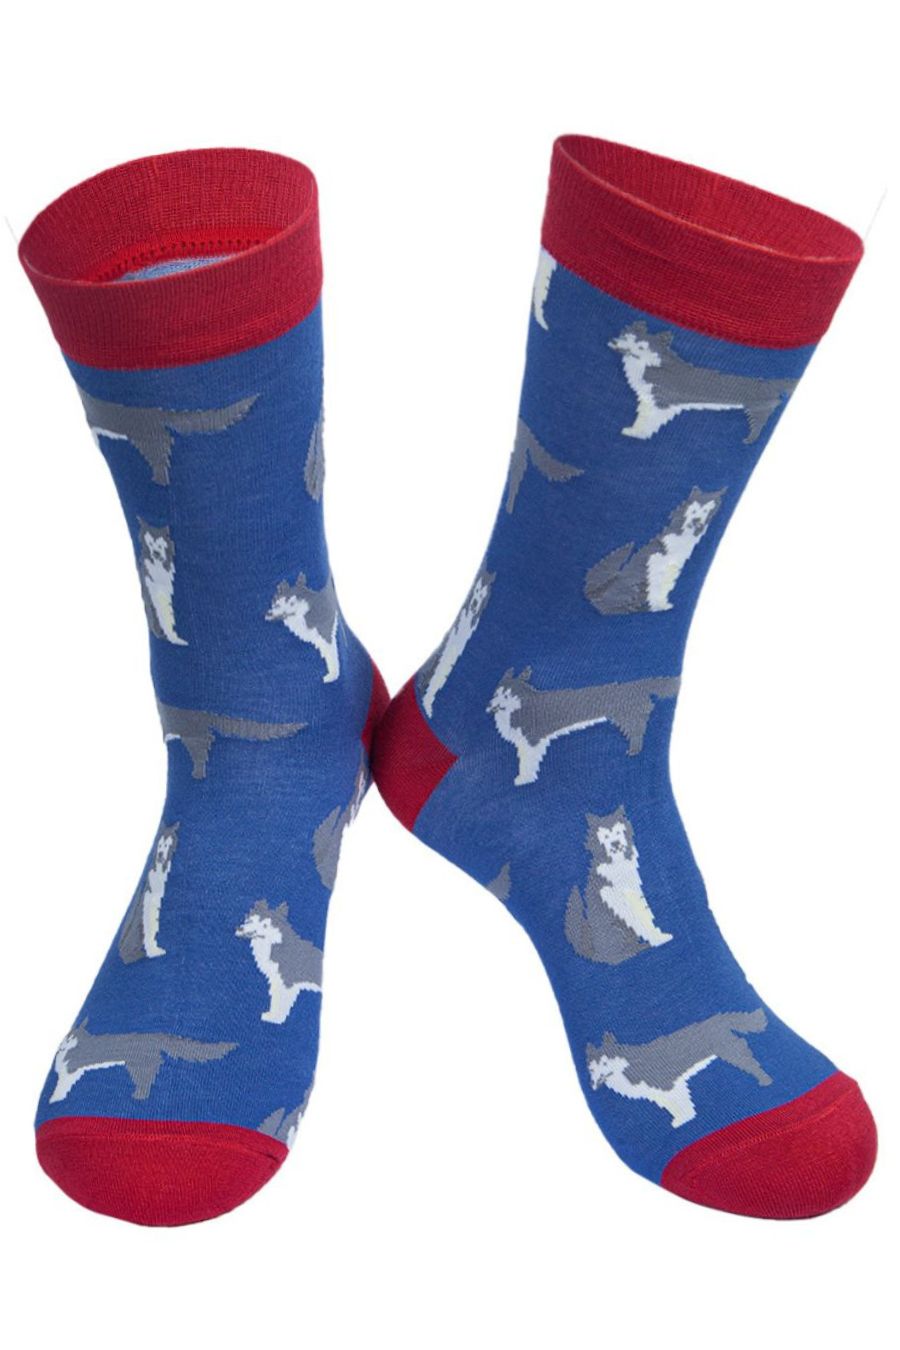 blue and red dress socks with husky dogs